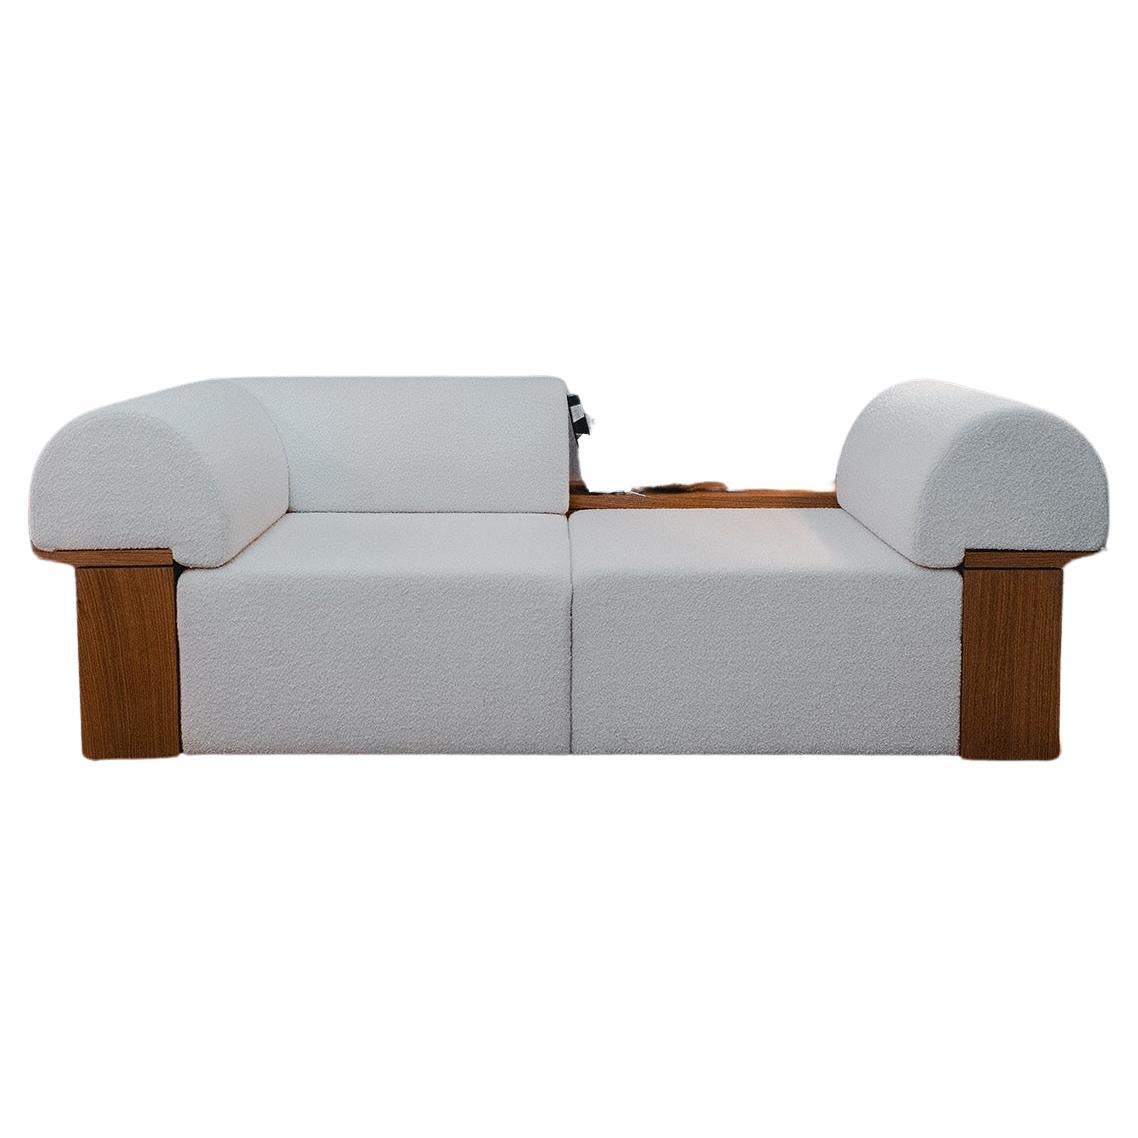 Wittorin sofa (2 modules), modular sofa in natural oak and boucle upholstery